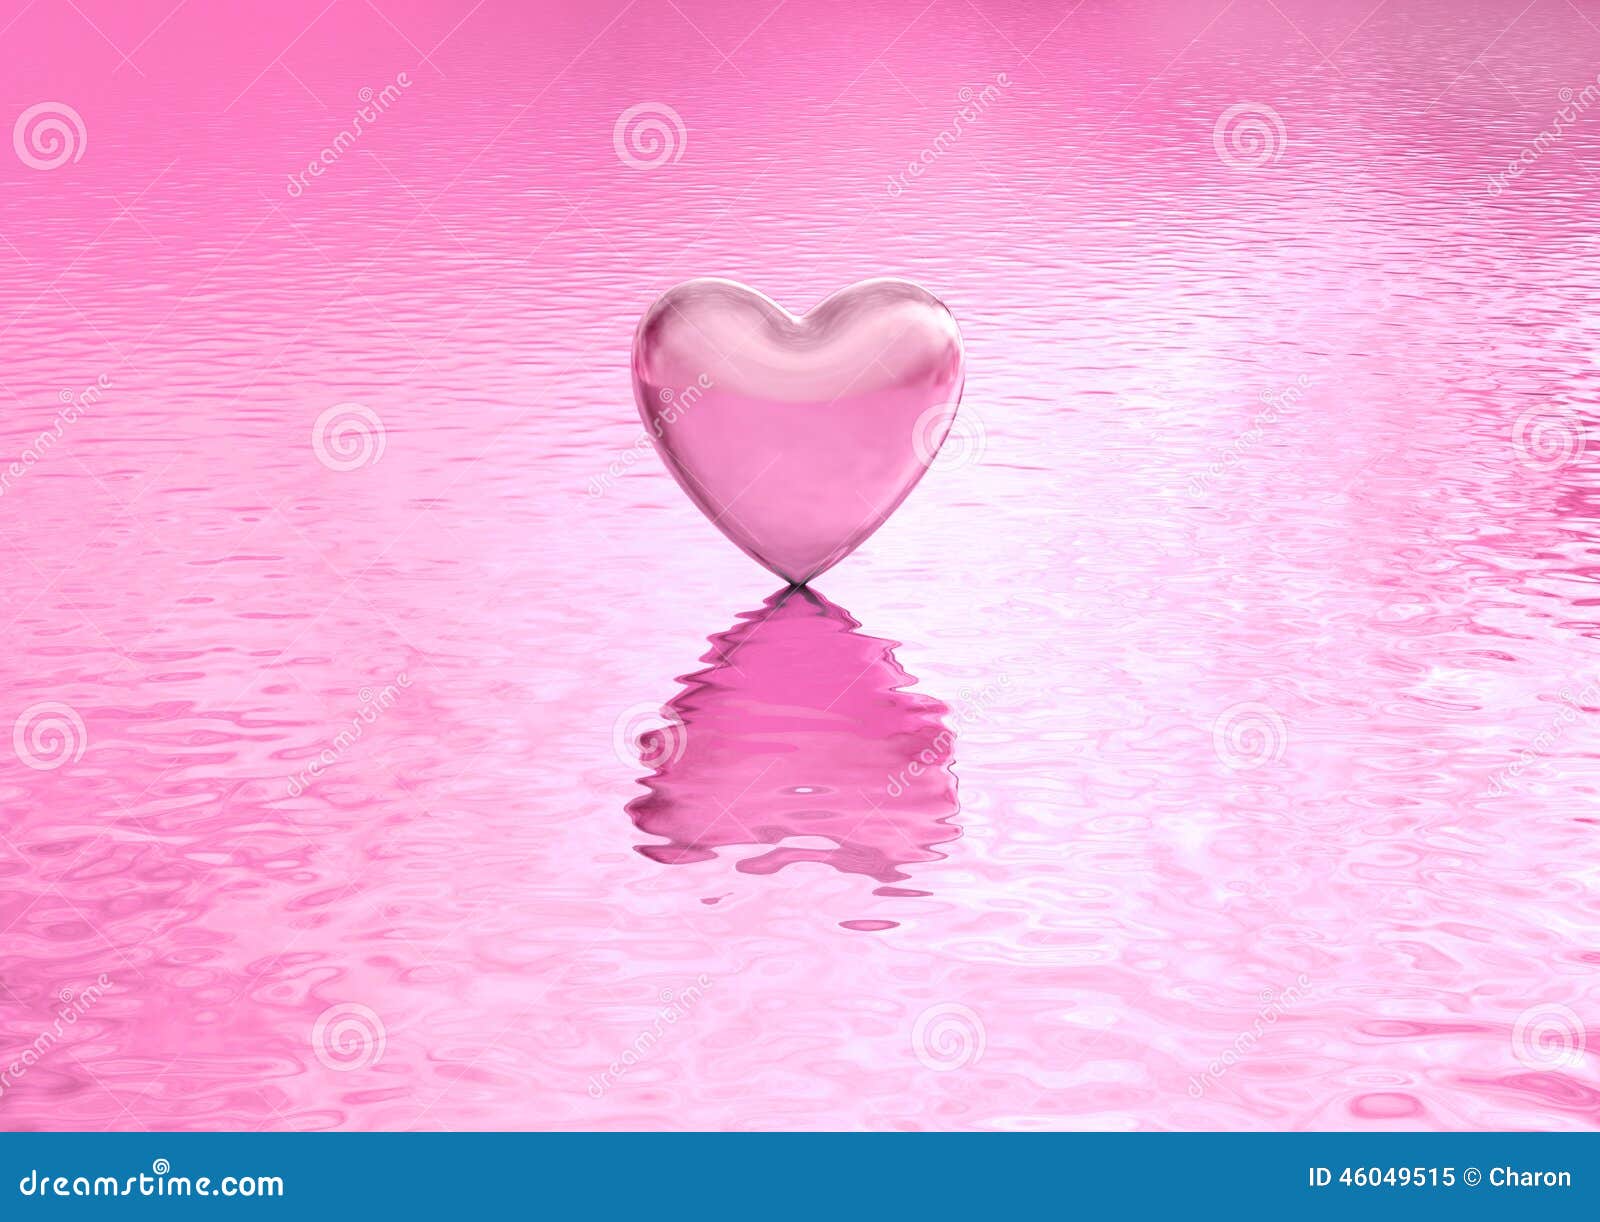 love background heart on water